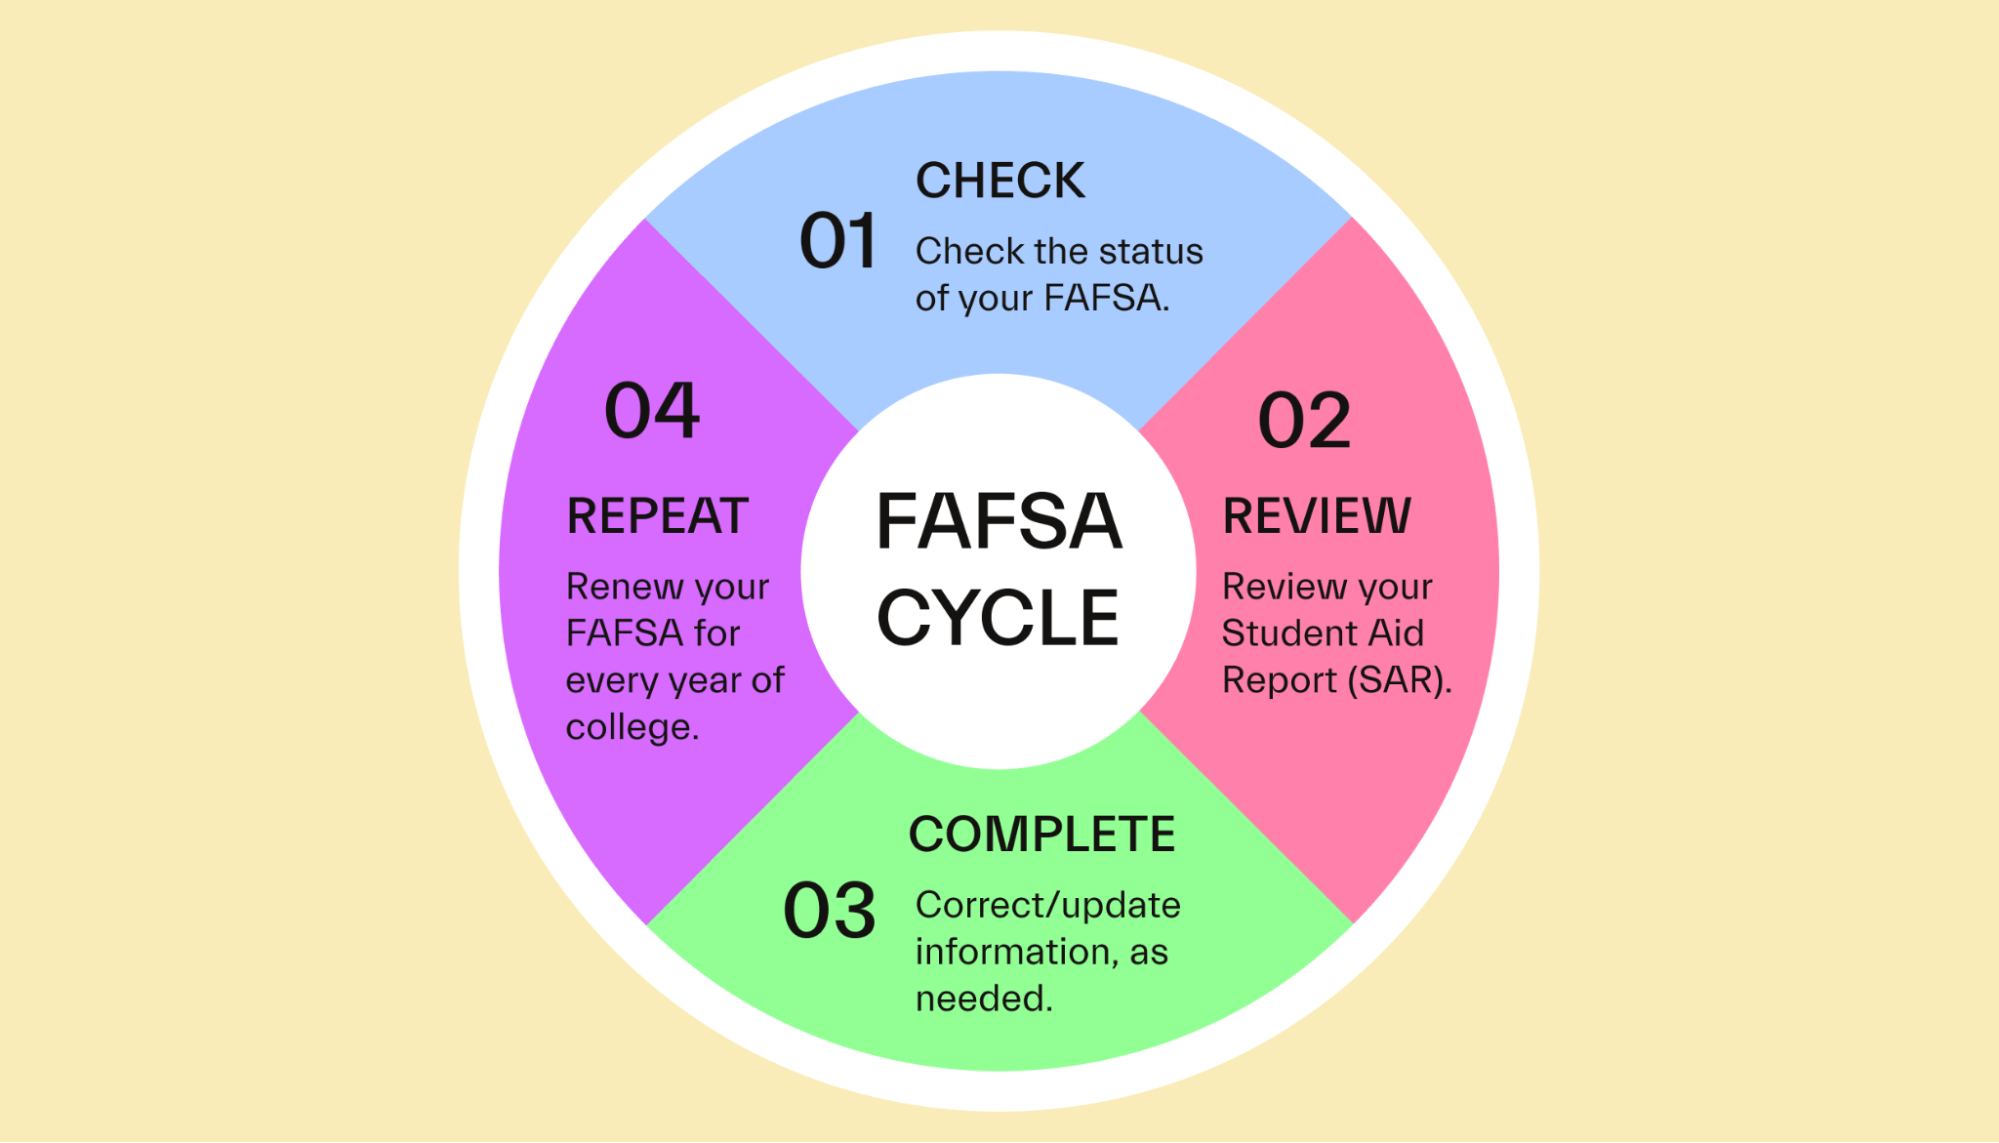 How long does filling the FAFSA take from start to finish? Complete Guide